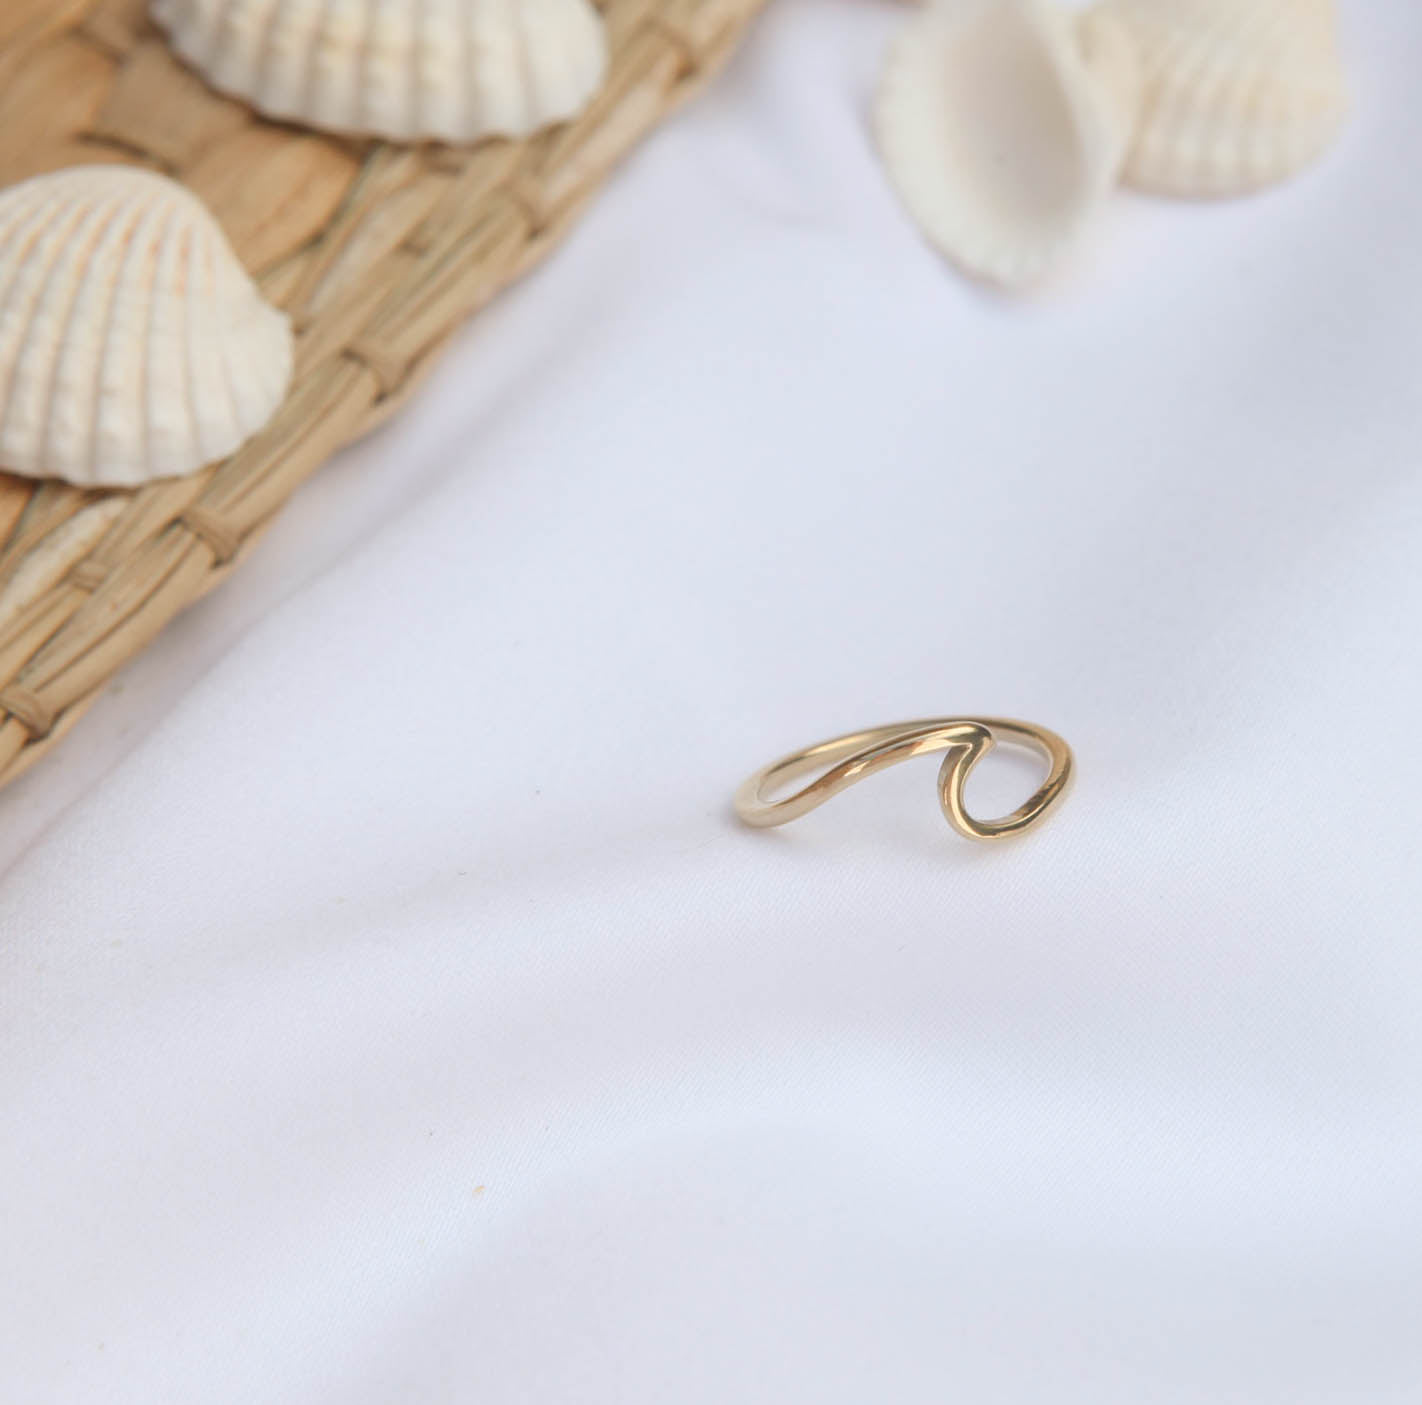 Ocean Wave Ring - 18k Gold plated stainless steel - Ocean Wave Jewelry